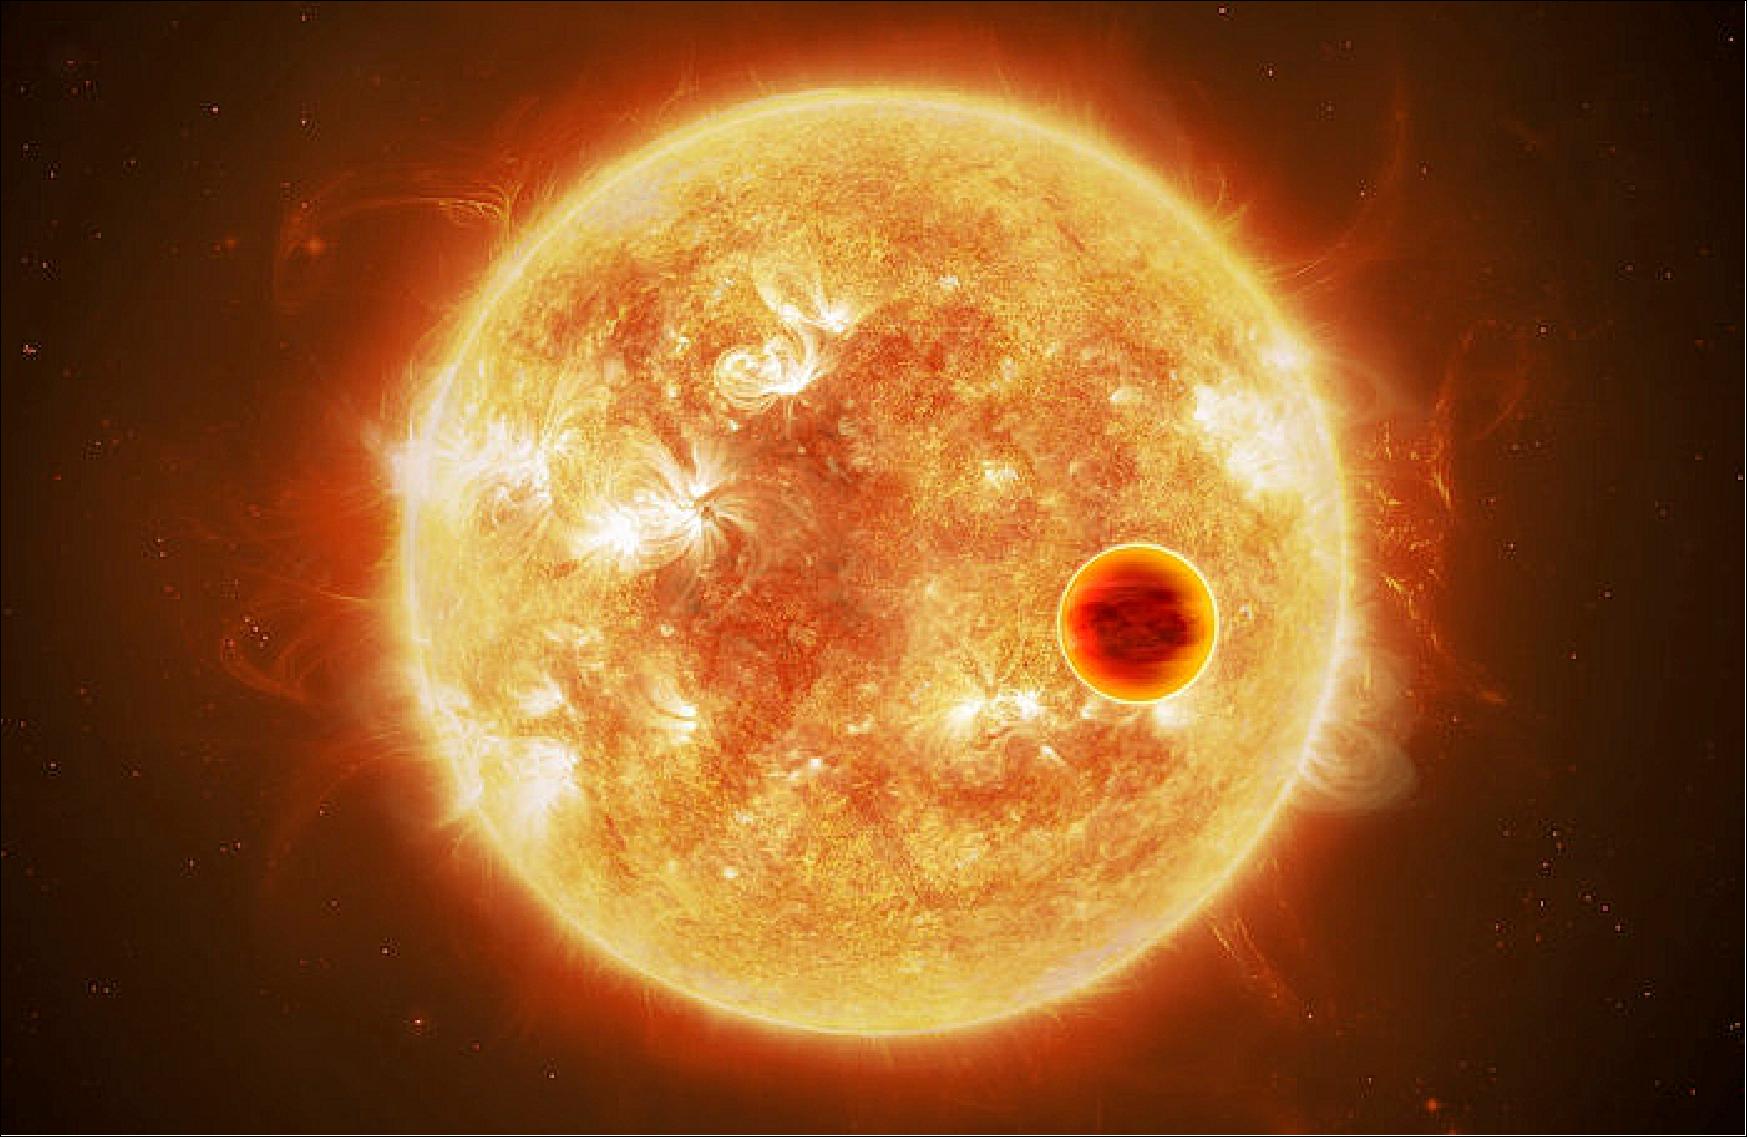 Figure 1: A hot planet transits in front of its parent star in this artist impression of an exoplanet system (image credit: ESA/ATG medialab, CC BY-SA 3.0 IGO)